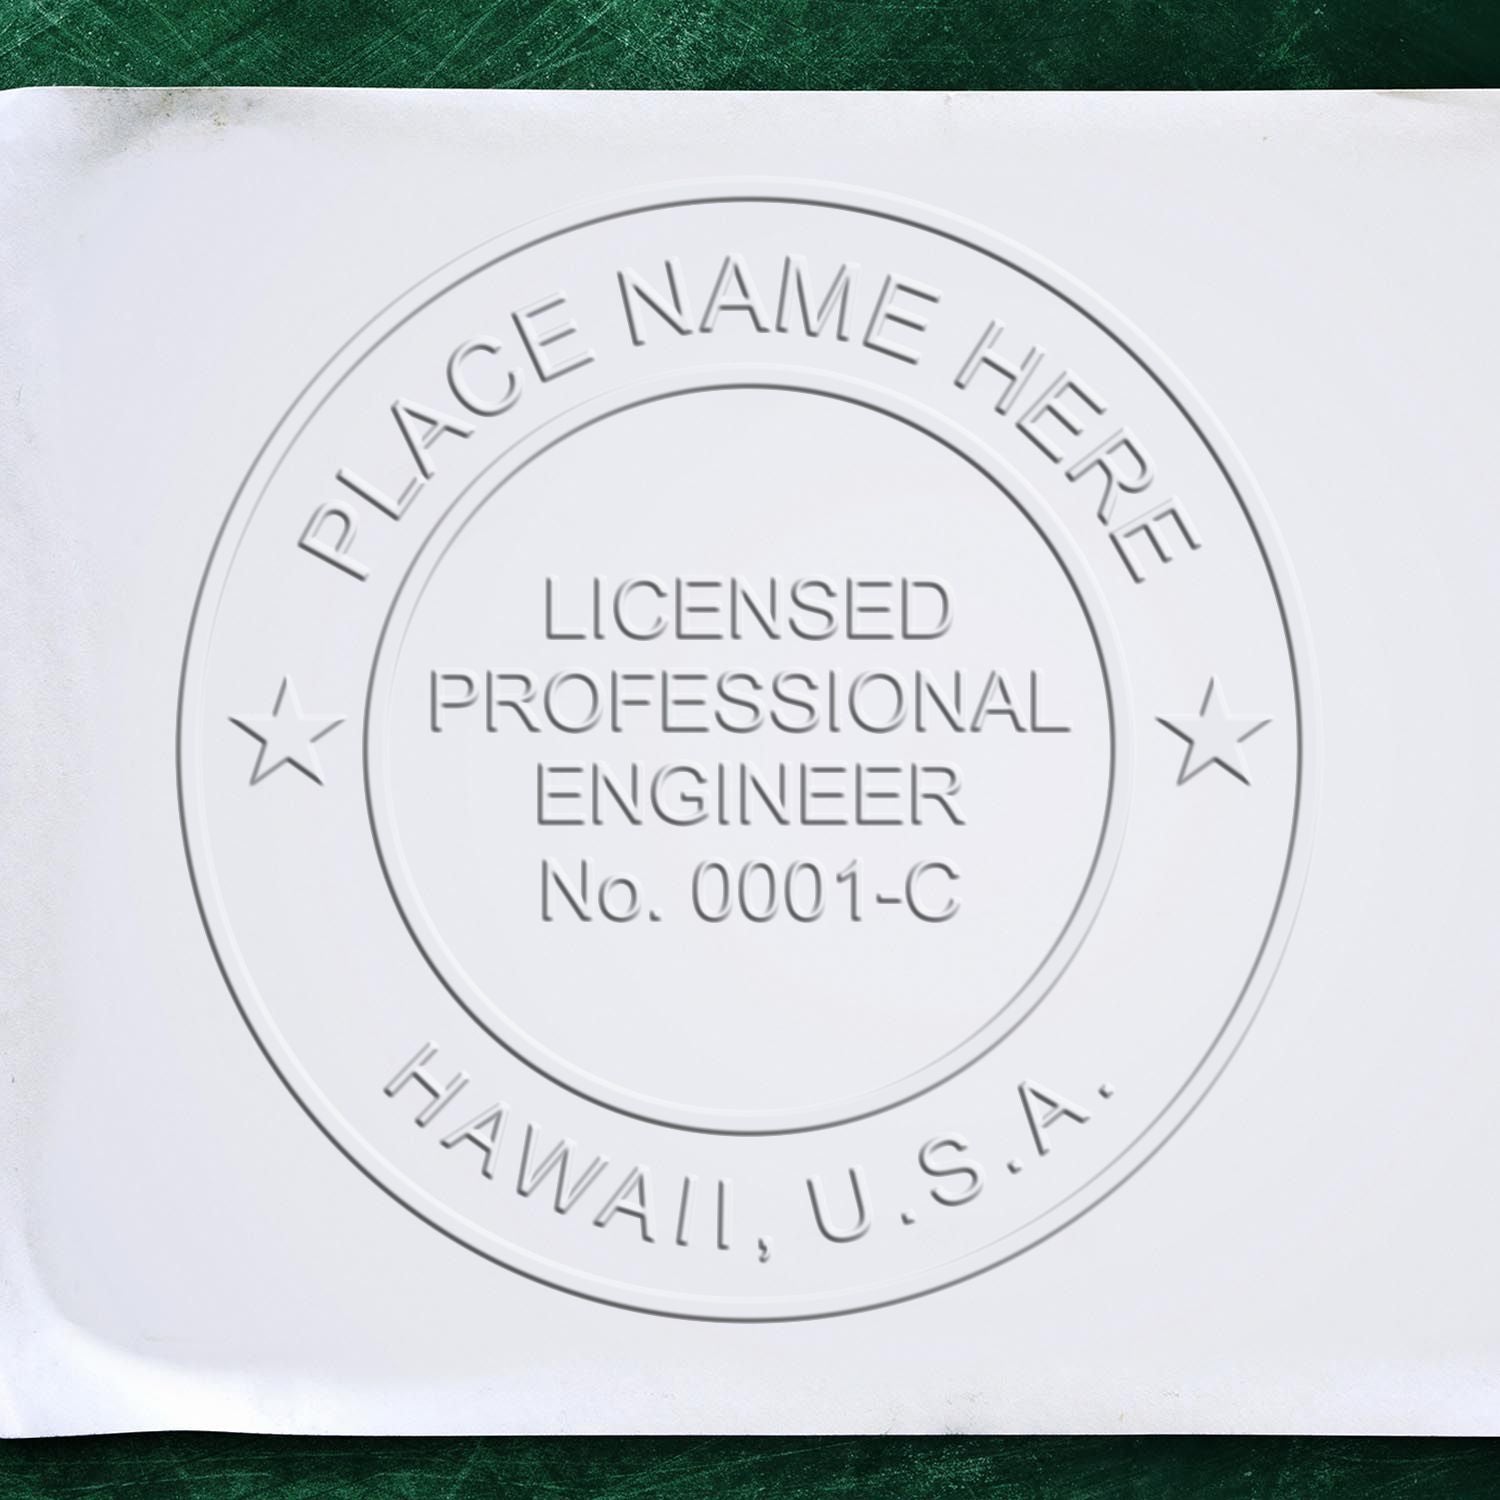 An in use photo of the Hybrid Hawaii Engineer Seal showing a sample imprint on a cardstock